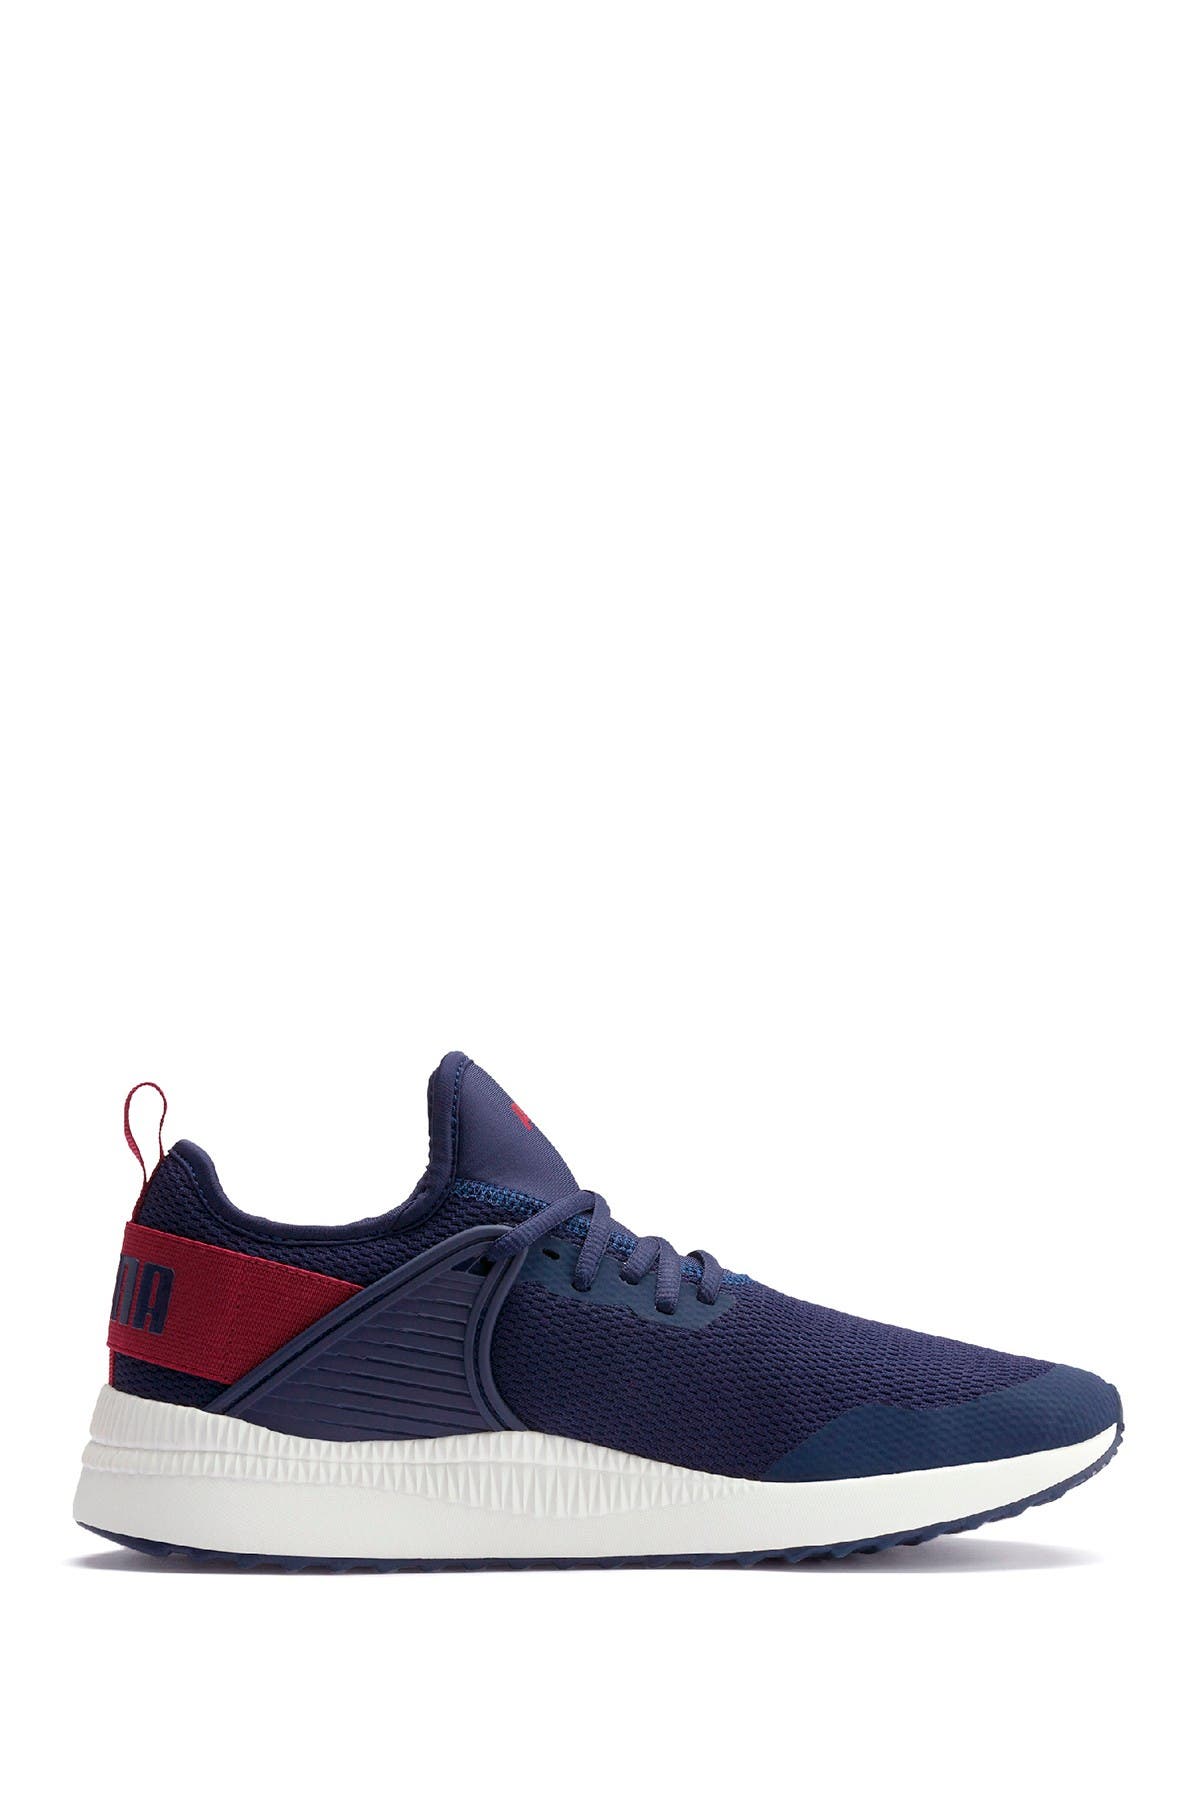 PUMA | Pacer Next Cage Core Sneaker 